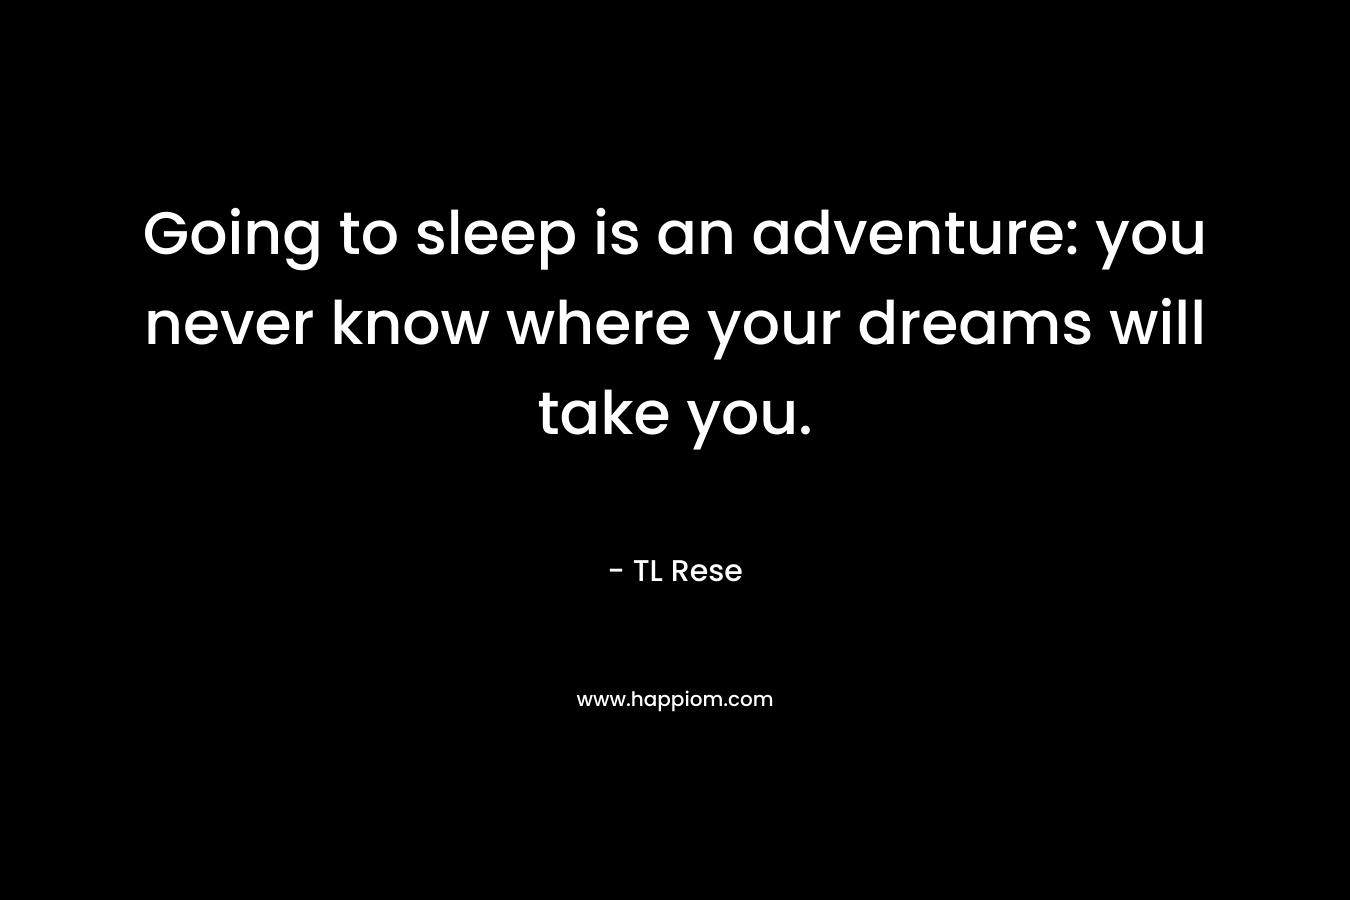 Going to sleep is an adventure: you never know where your dreams will take you.